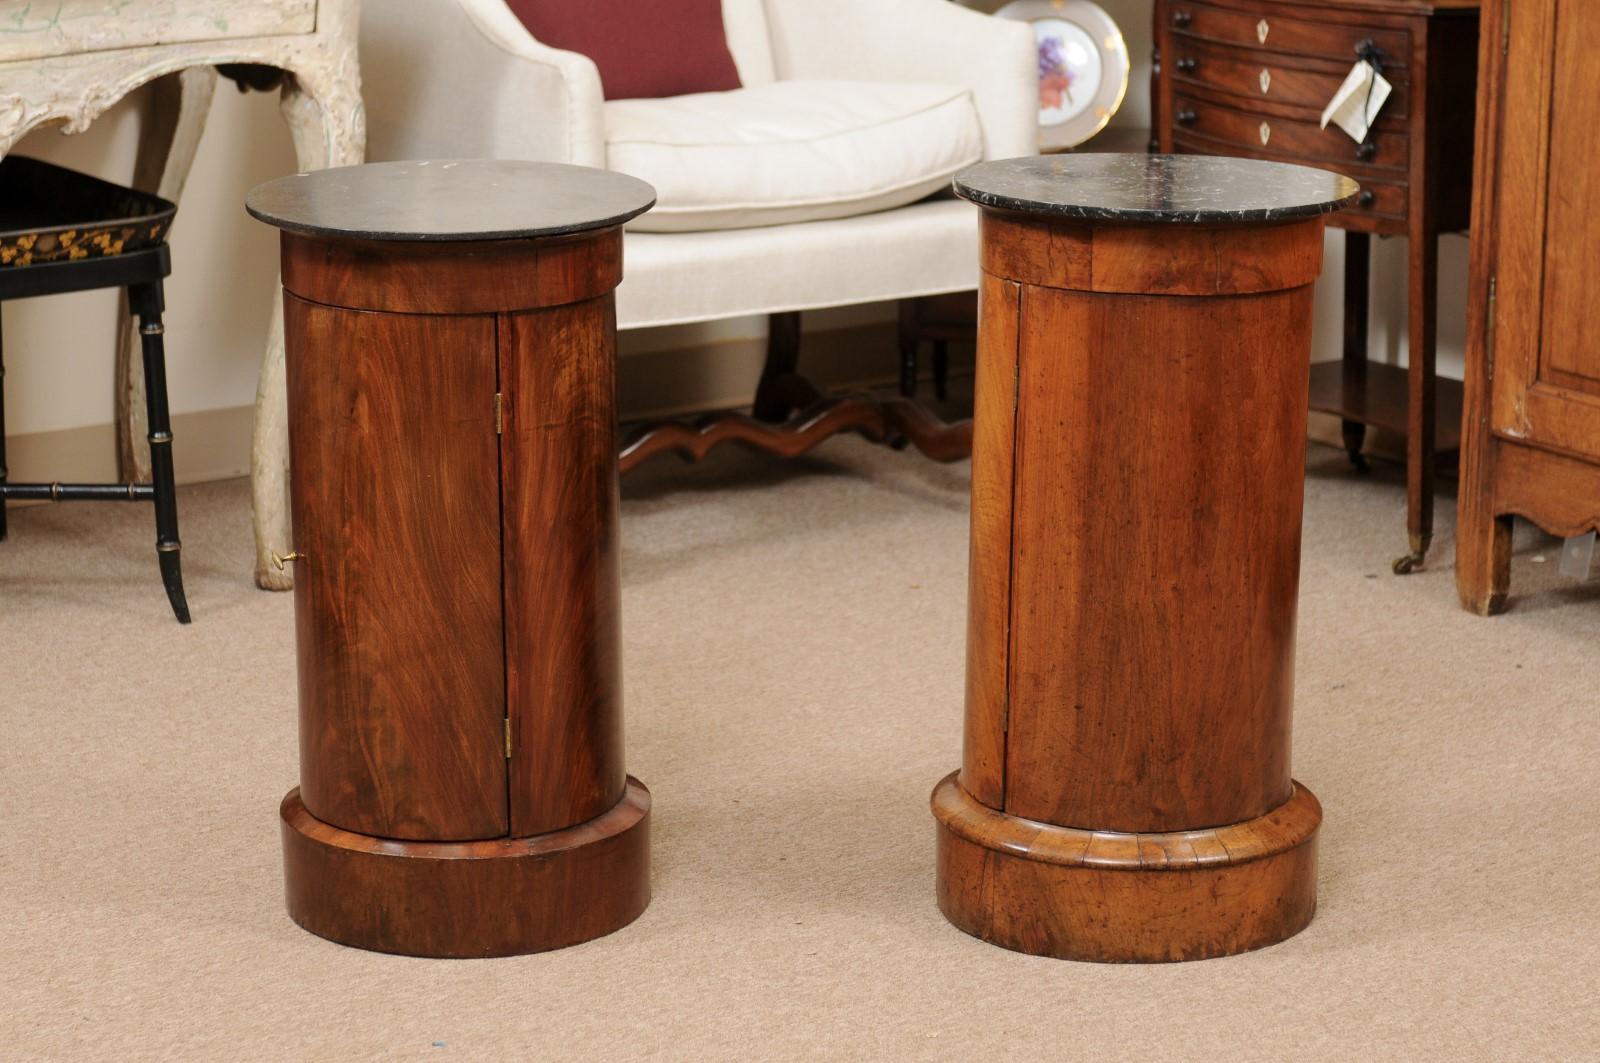 Matched Pair of Cylindrical Cabinets in Mahogany with Black Marble Tops 2